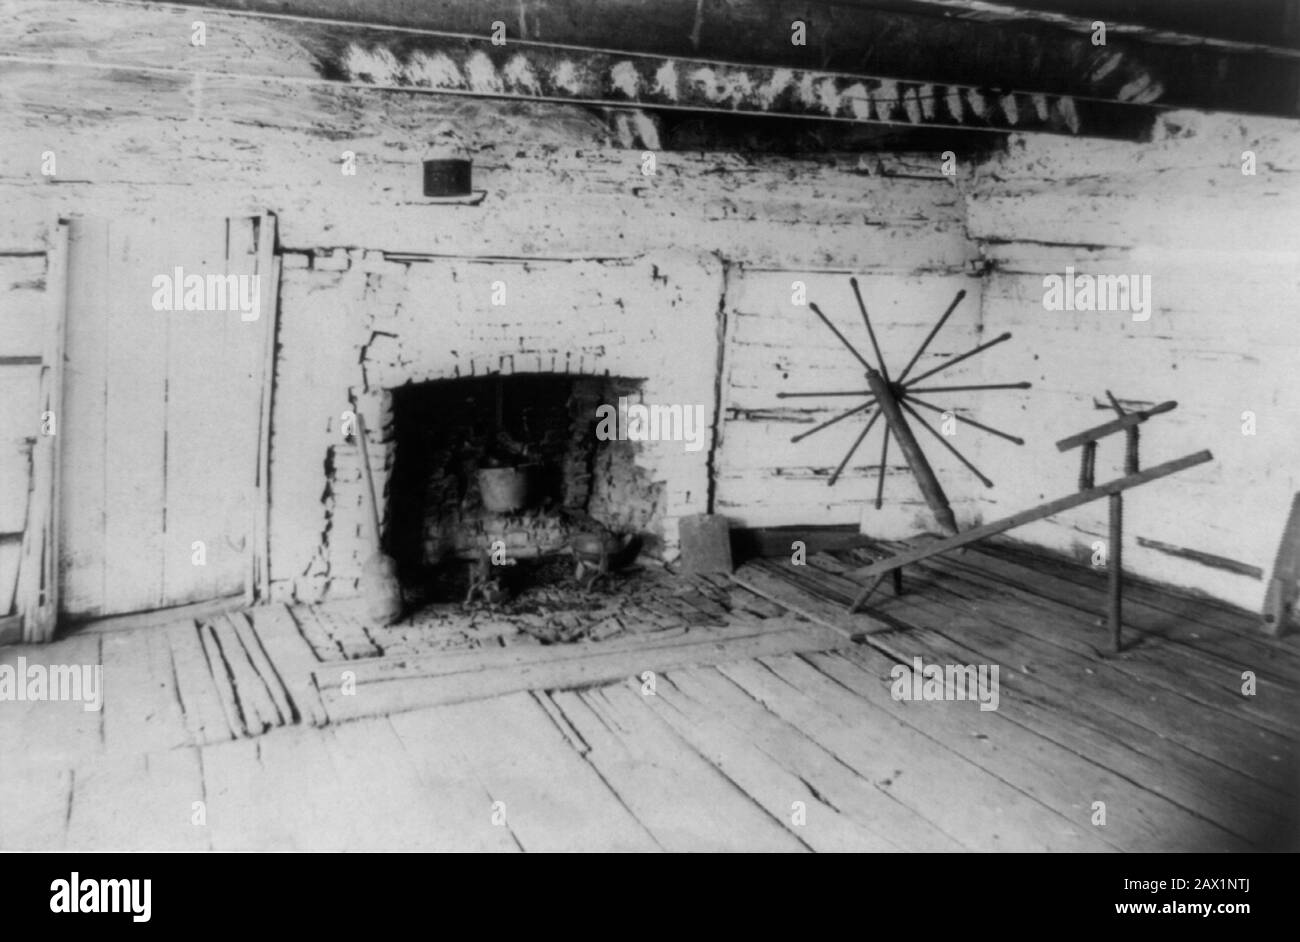 1891 , Big South Fork , KY , USA :  An Interior view of the original cabin birthplace by U.S.A. President ABRAHAM LINCOLN ( 1809 - 1865 ) showing the old fireplace in the west room and the old spinning jenny of Mrs. Lincoln . Photo by Kimball Hall Studio, 243 Wabash Ave., Chicago.  -  Presidente della Repubblica - Stati Uniti  - USA  - Abramo - log cabins  - capanna - luogo di nascita - casa natale  ----  Archivio GBB Stock Photo